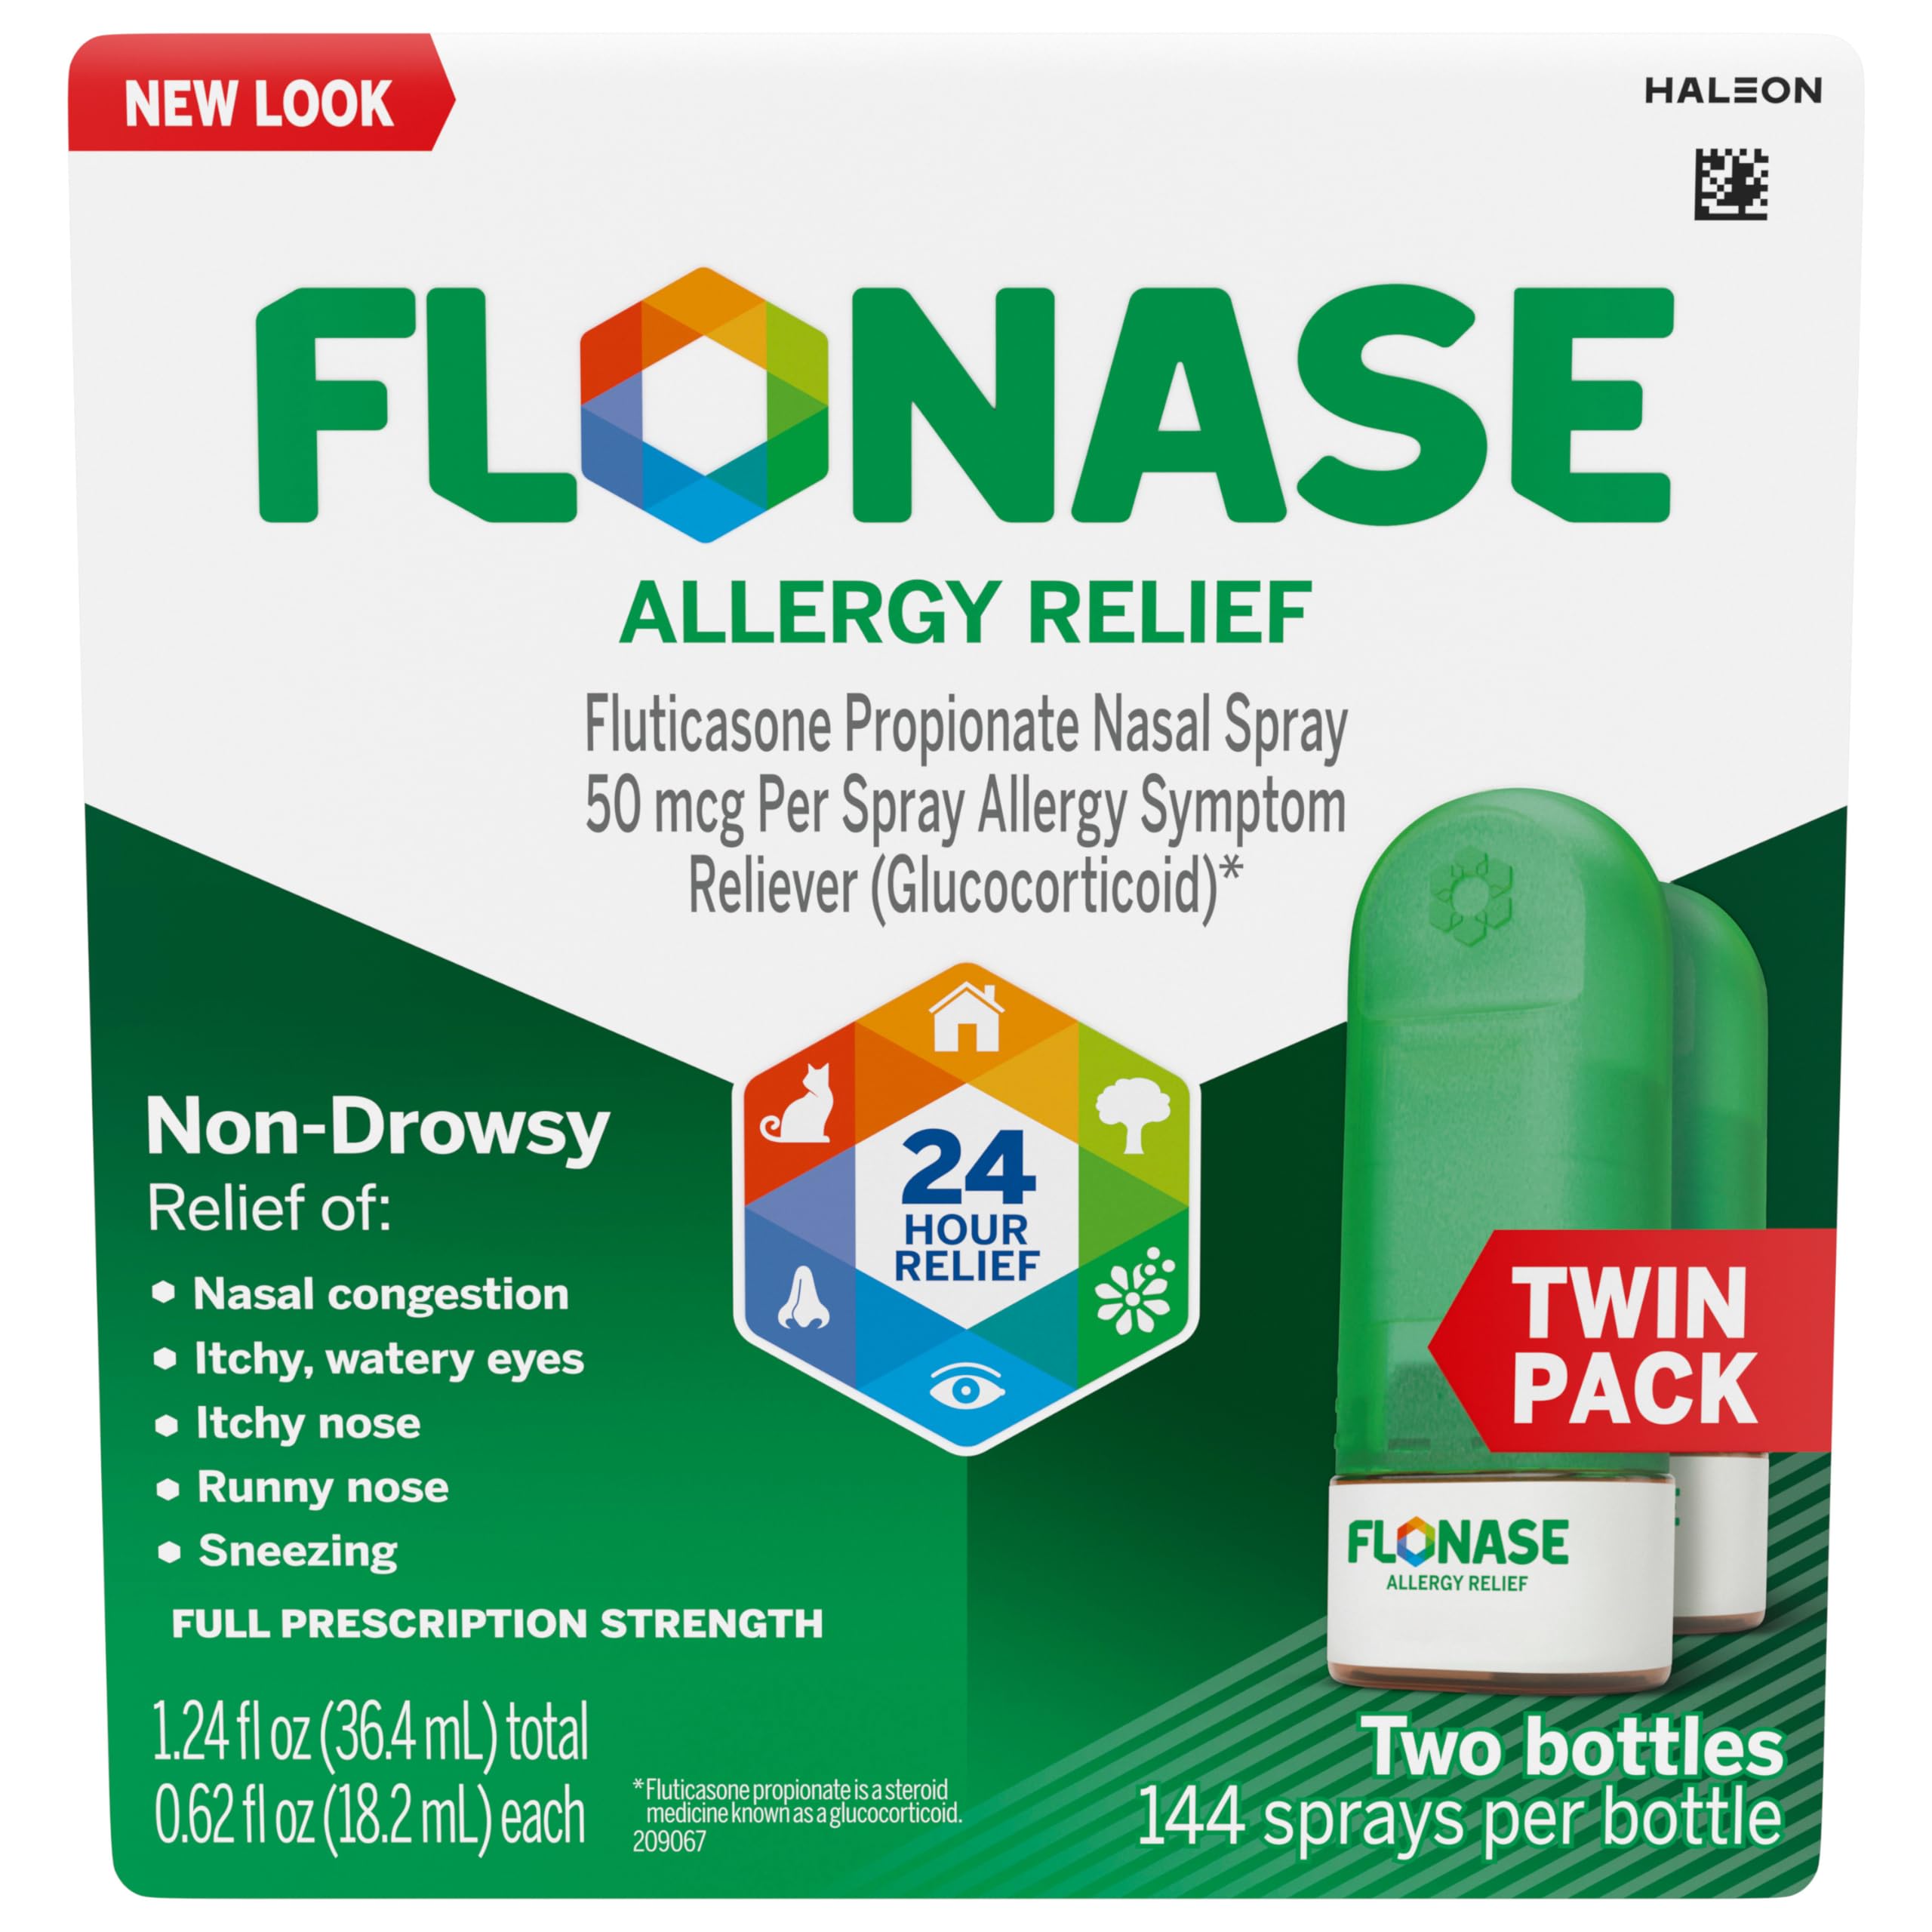 2-Pack 144-Sprays Flonase Allergy Relief Metered Nasal Spray $30.60 +$10 Amazon Credit w/ S&S + Free Shipping w/ Prime or on $35+